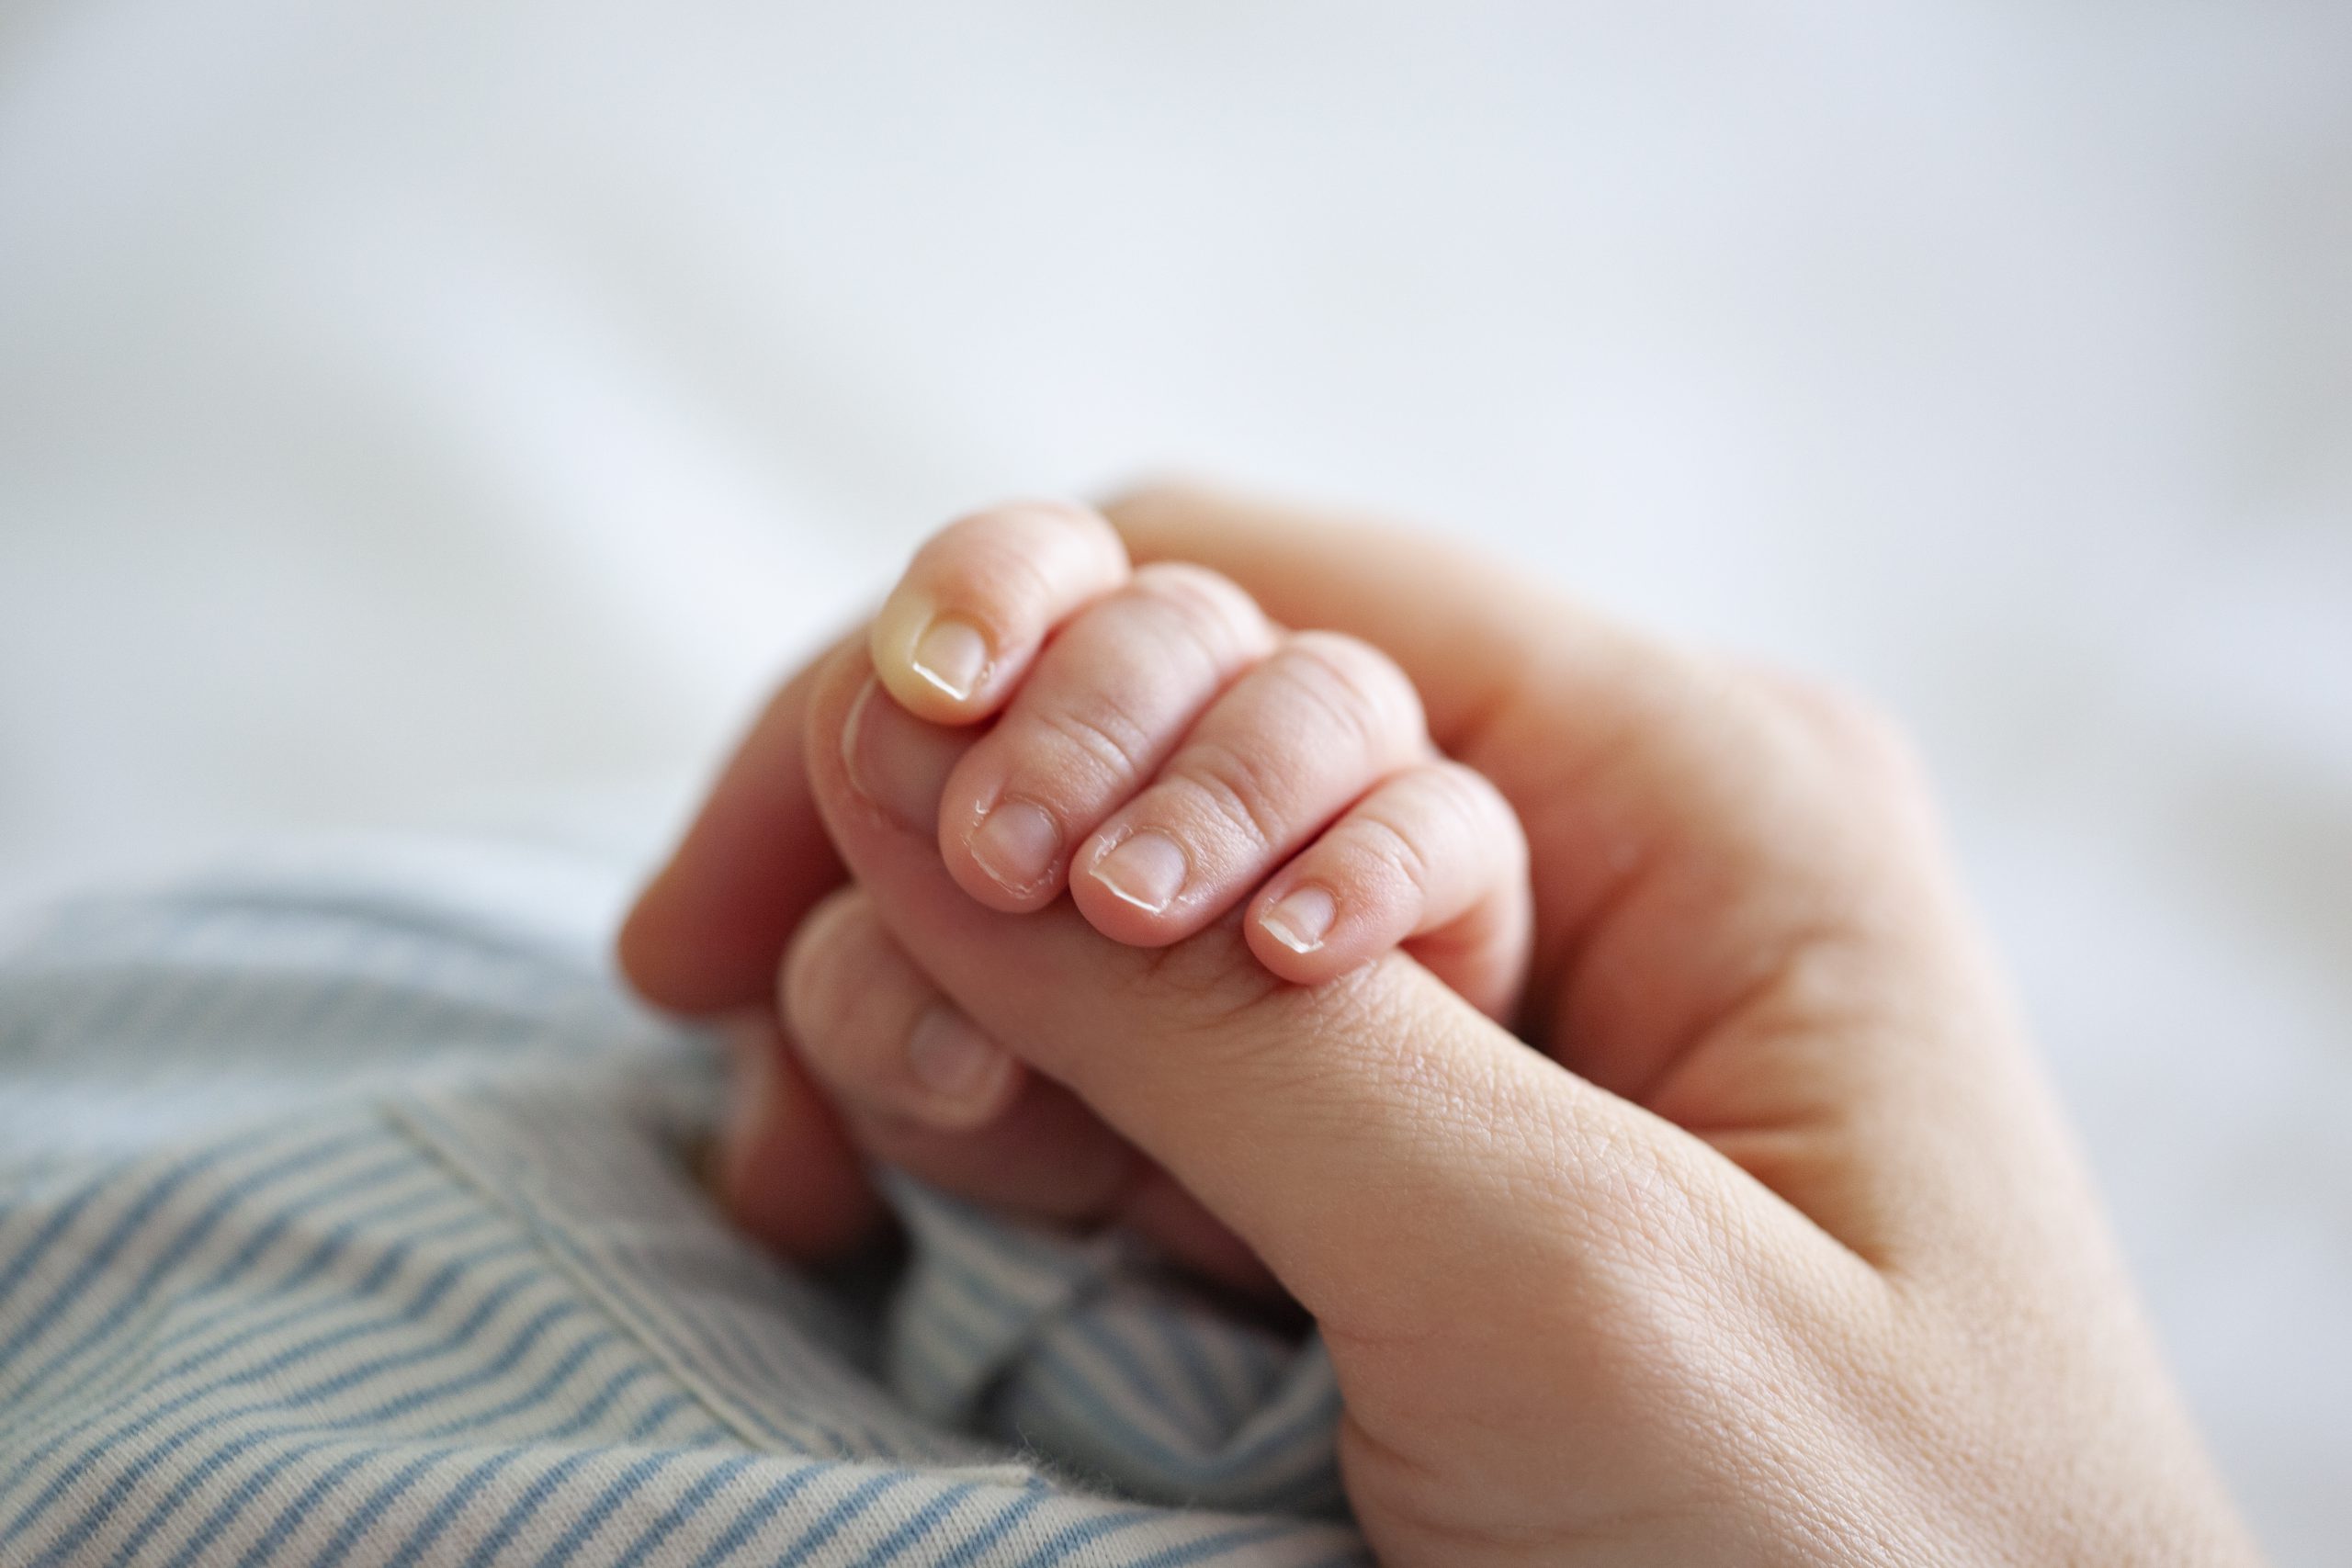 A baby holding someone's finger.